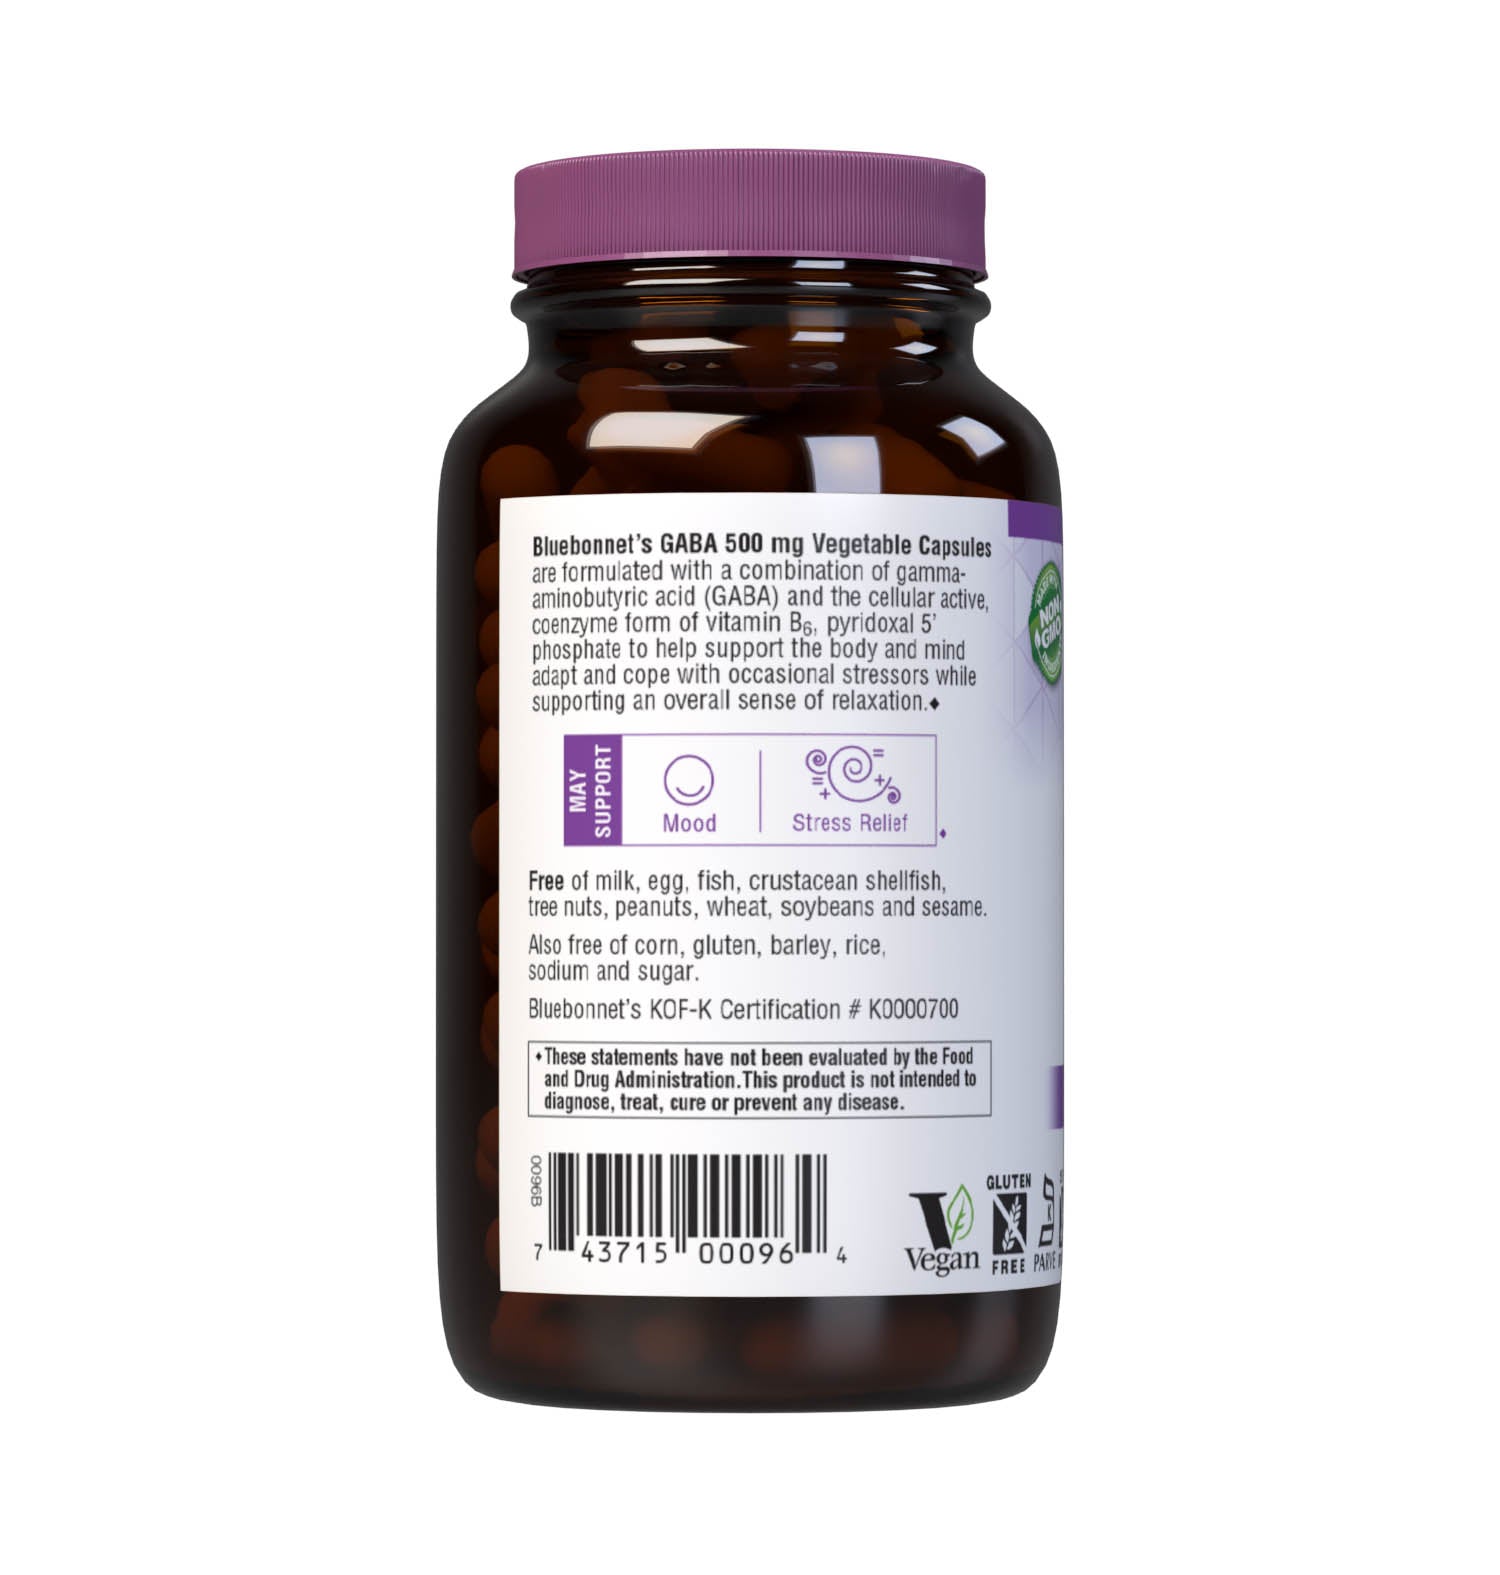 Bluebonnet’s GABA 500 mg 120 Vegetable Capsules are specially formulated to help the body and mind adapt and cope with occasional stressors while supporting an overall sense of relaxation utilizing a combination of gamma-aminobutyric acid (GABA) and the cellular active, coenzyme form of vitamin B6, pyridoxal 5’ phosphate. Description panel. #size_120 count